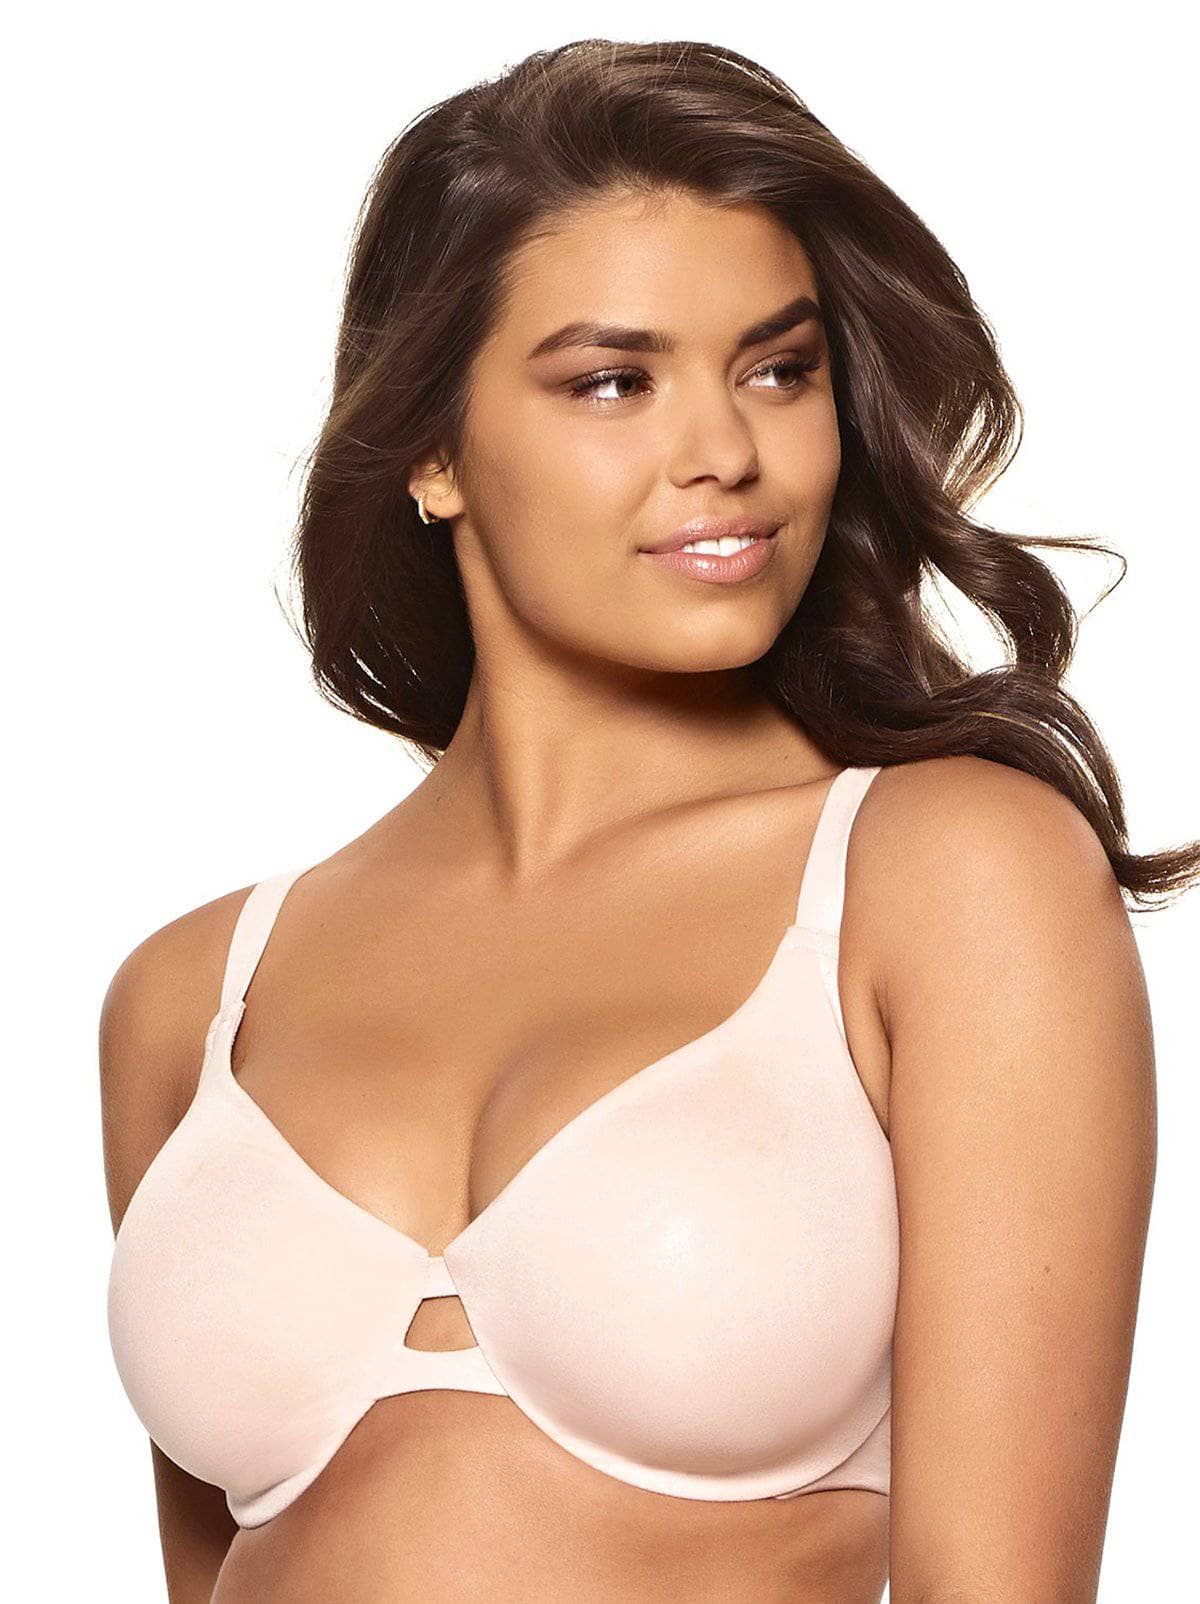 Exclare Racerback Full Figure Underwire Women's Front Close Bra Plus Size  Seamless Unlined Bra For Large Bust(Beige,38DDD) 